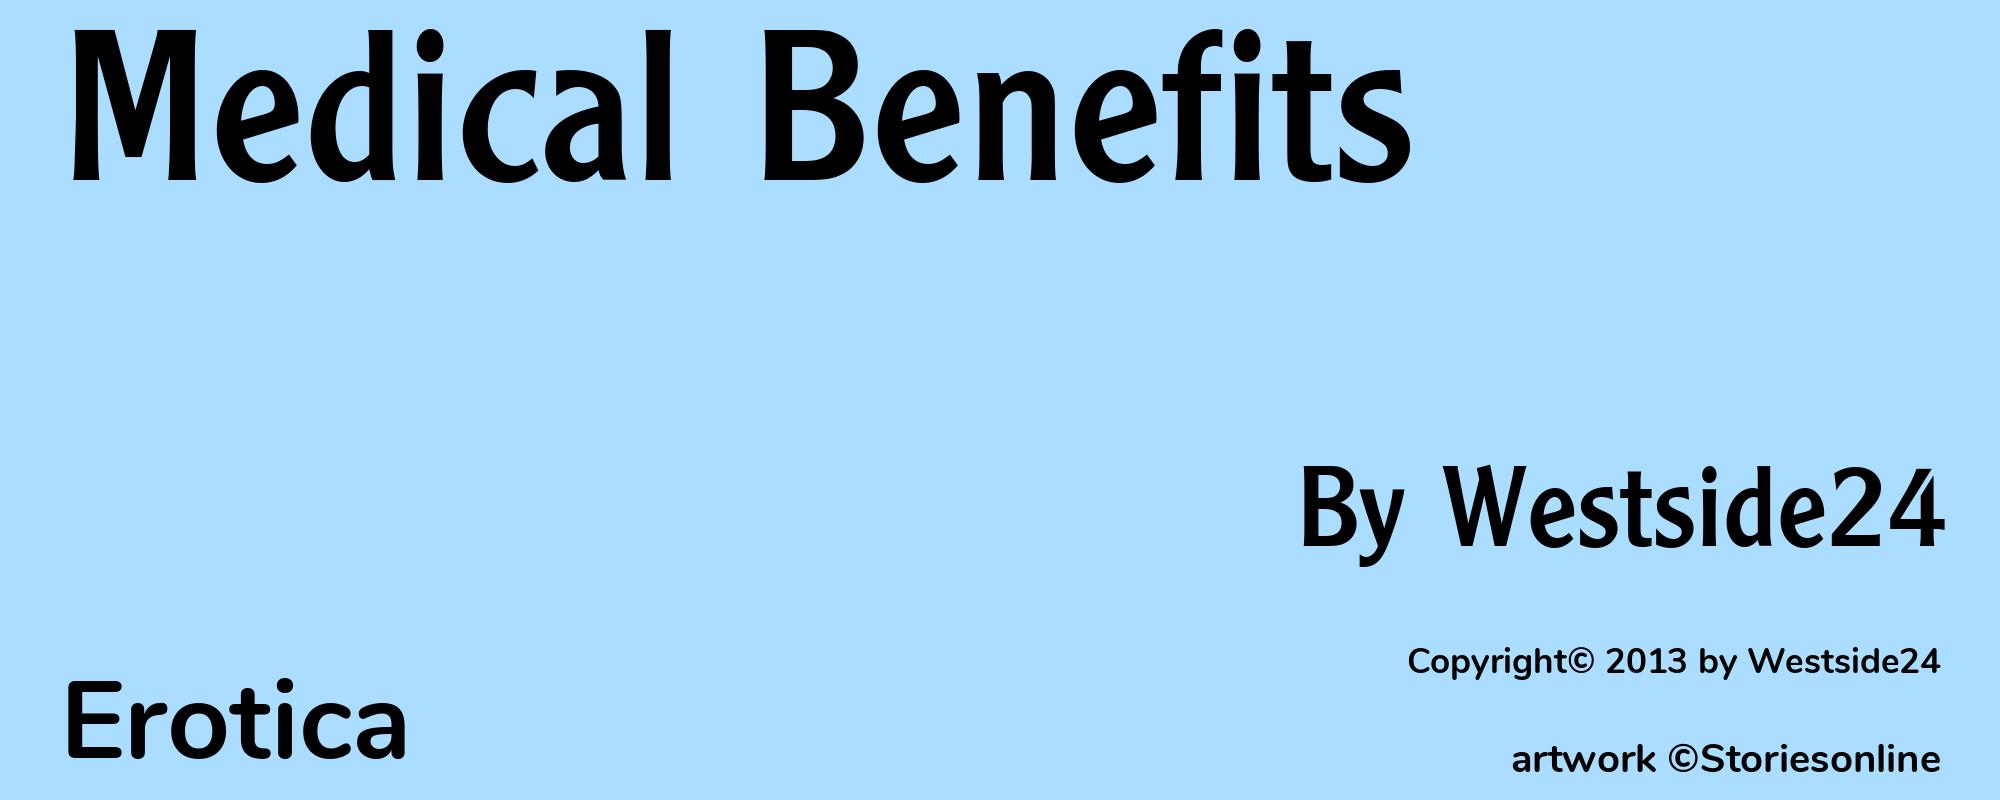 Medical Benefits - Cover